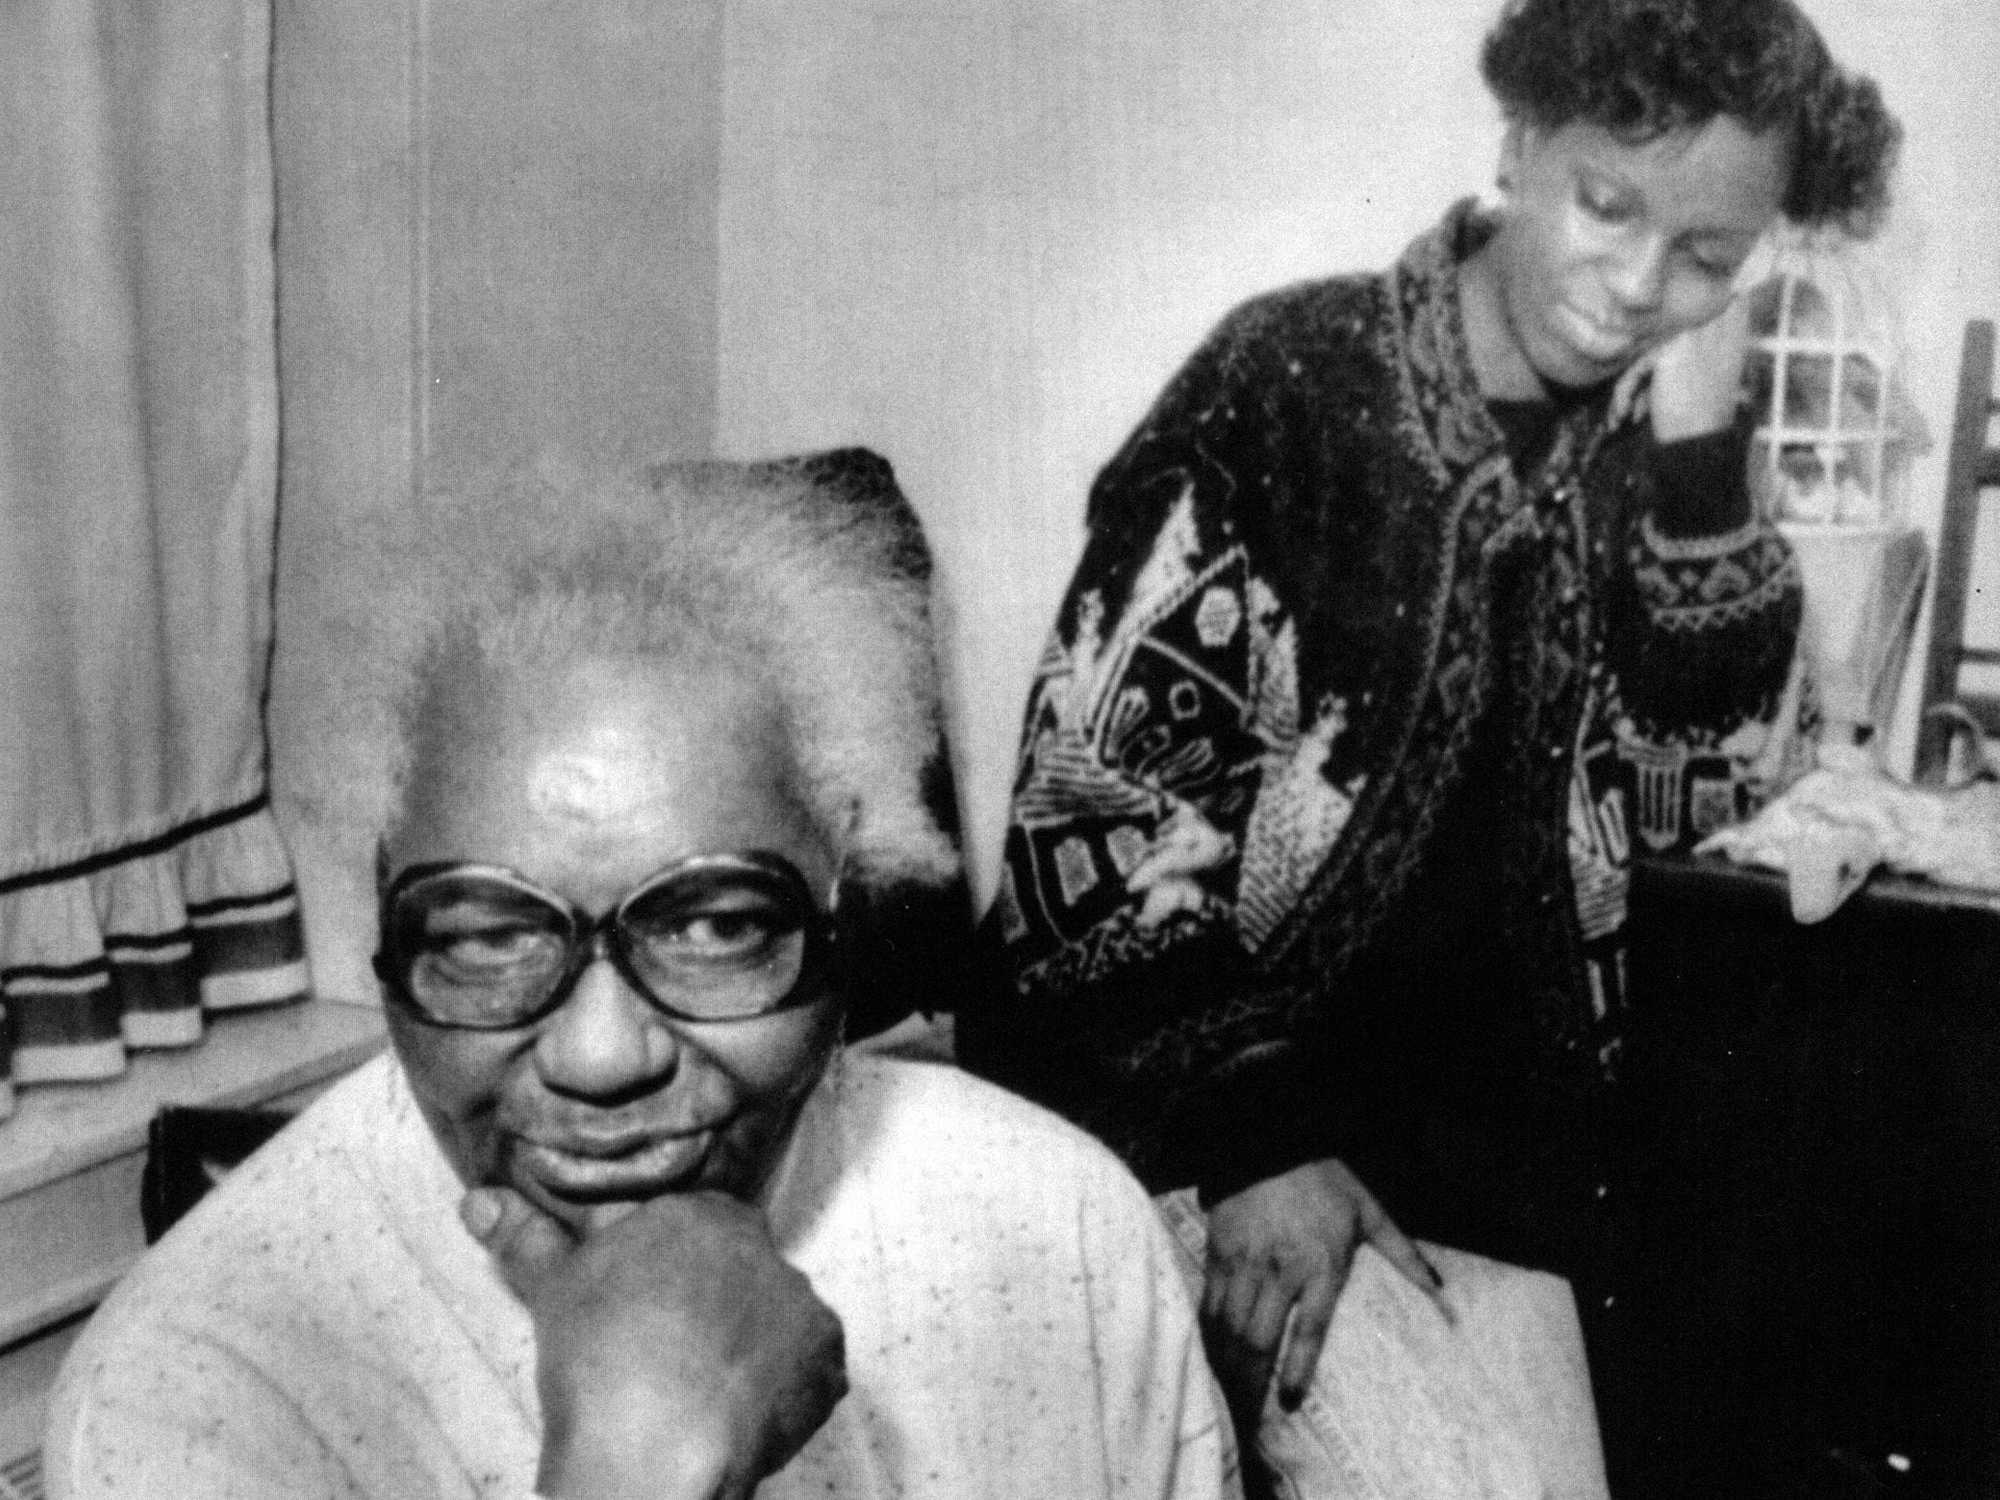 Pauline Bennett, mother of William "Willie" Bennett, and her daughter Tarita in December 1989. The Bennetts insisted their son and brother was innocent when he was publicly cast as the main suspect in the Stuart shooting. 